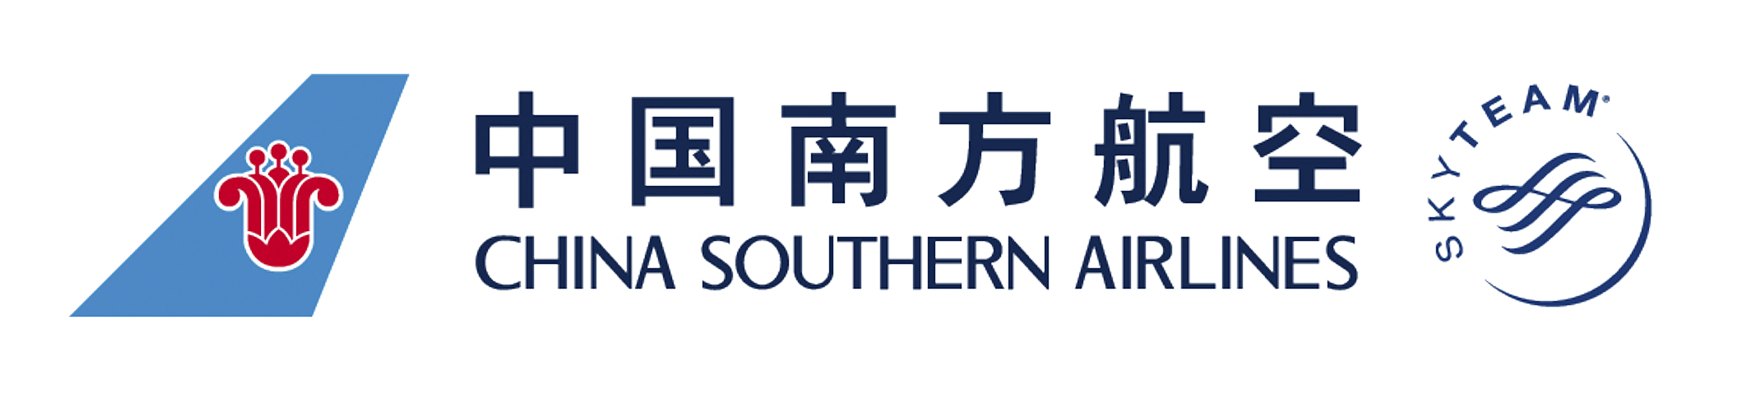 china-southern-airlines.png